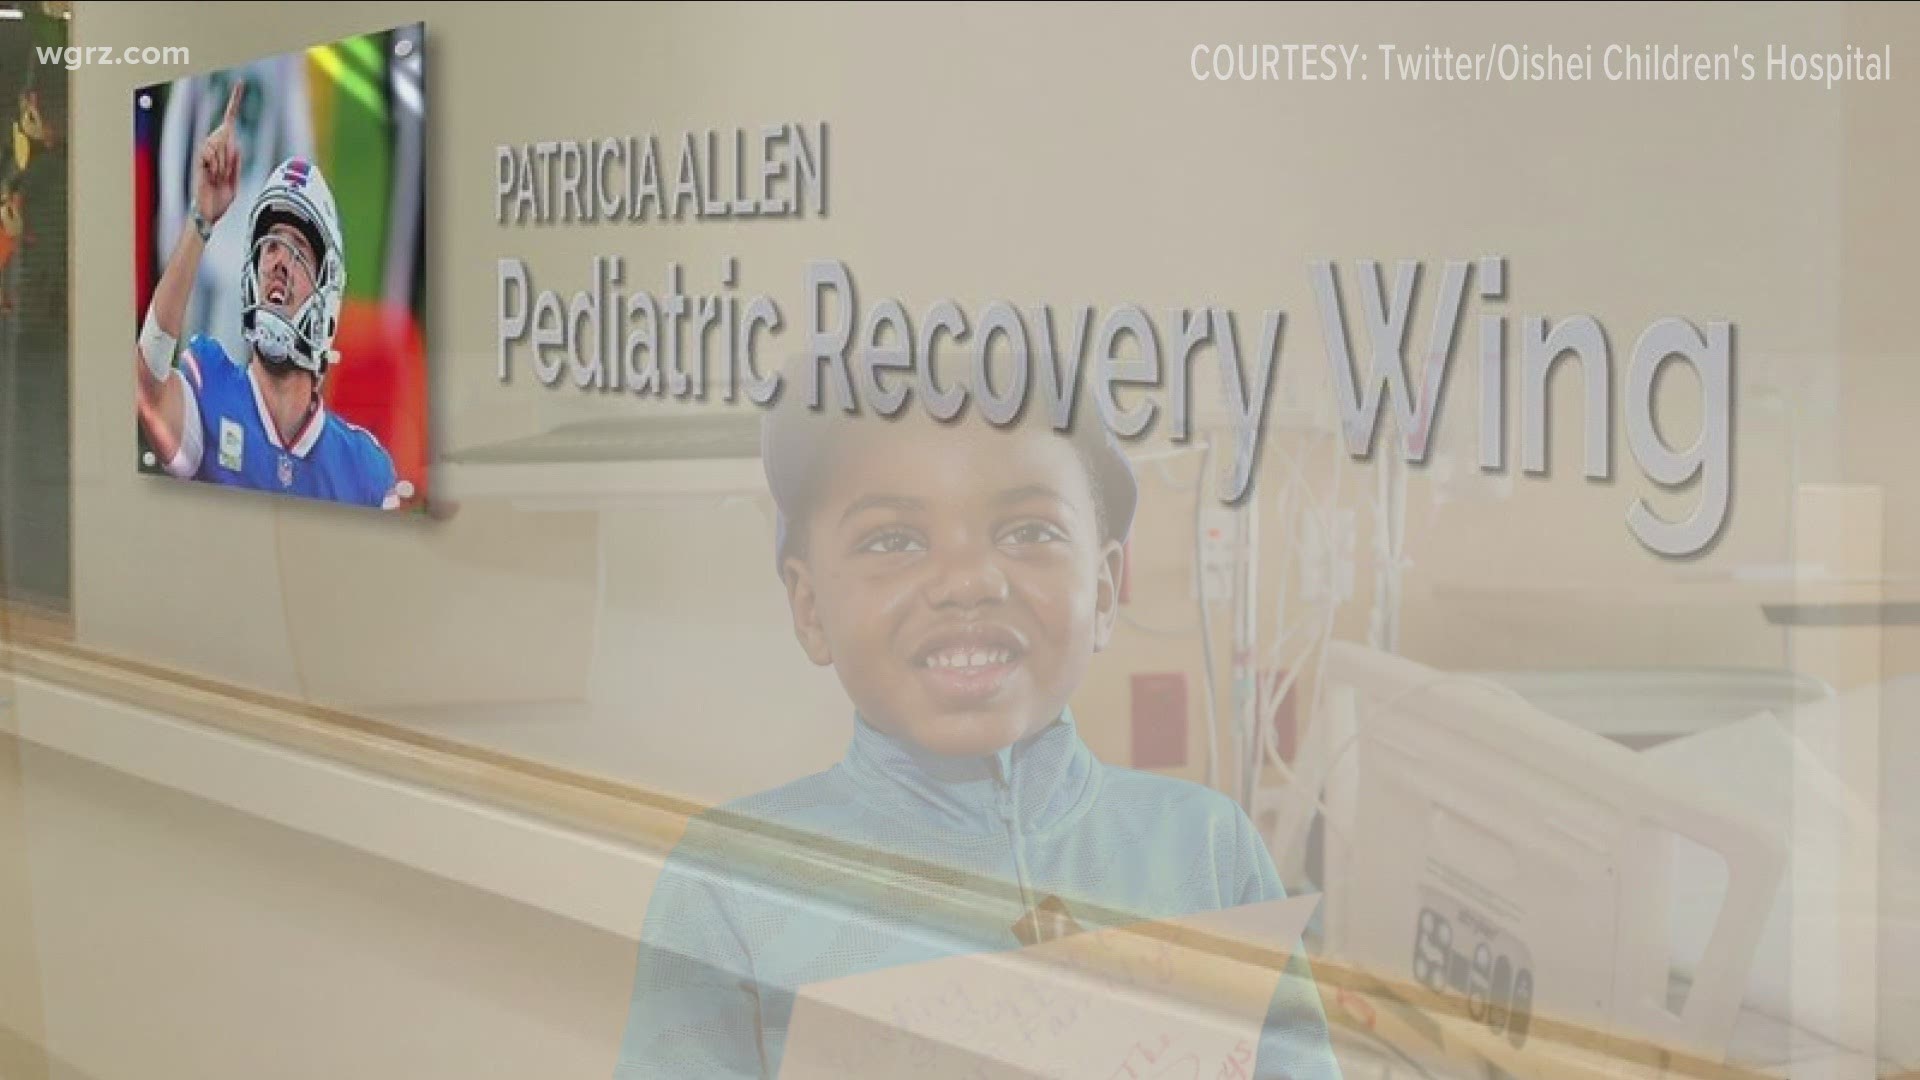 The Hospital is naming a wing after Patricia Allen and launching a new fund in her honor.